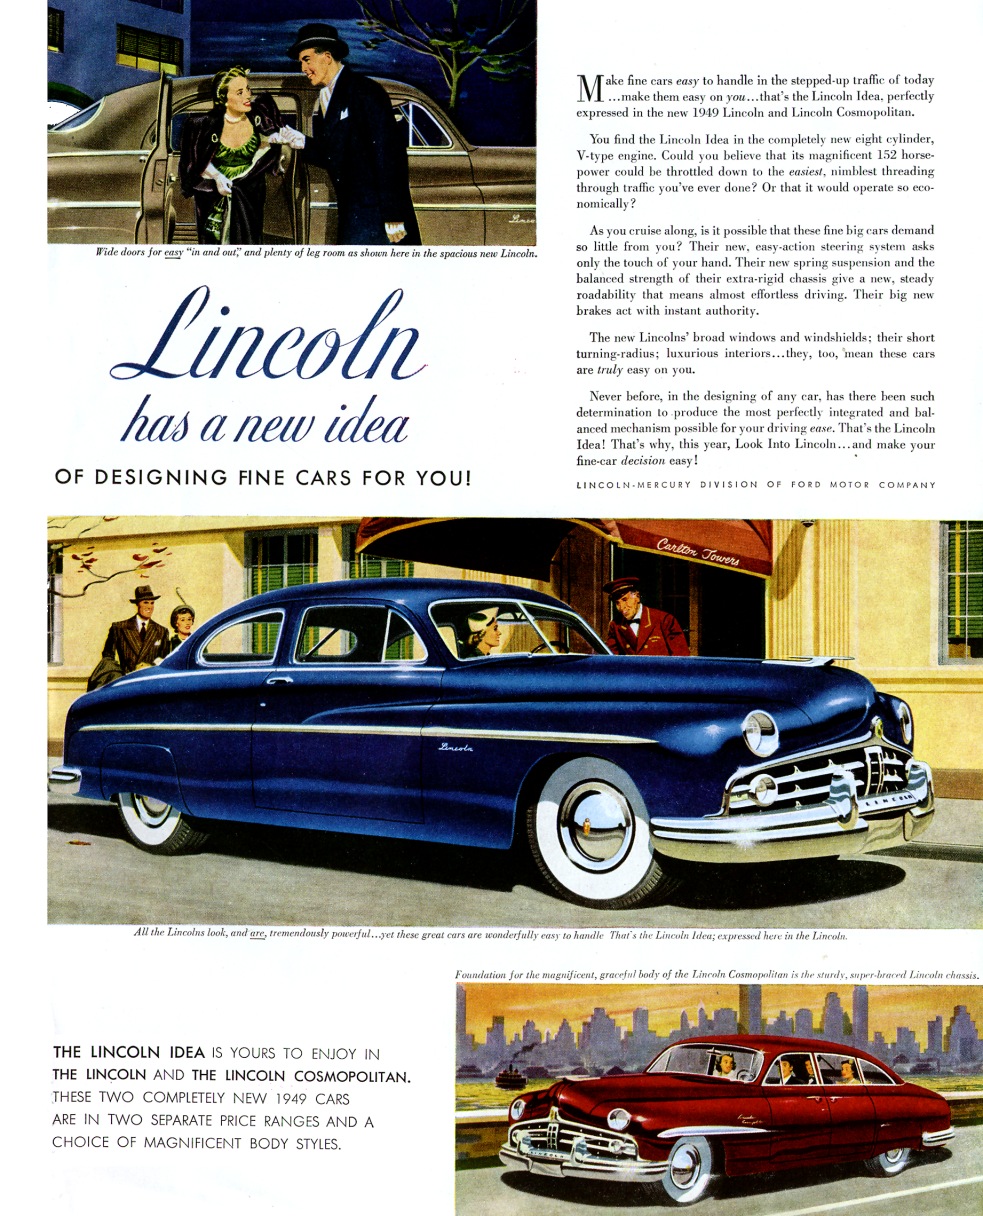 1949 Lincoln Auto Advertising